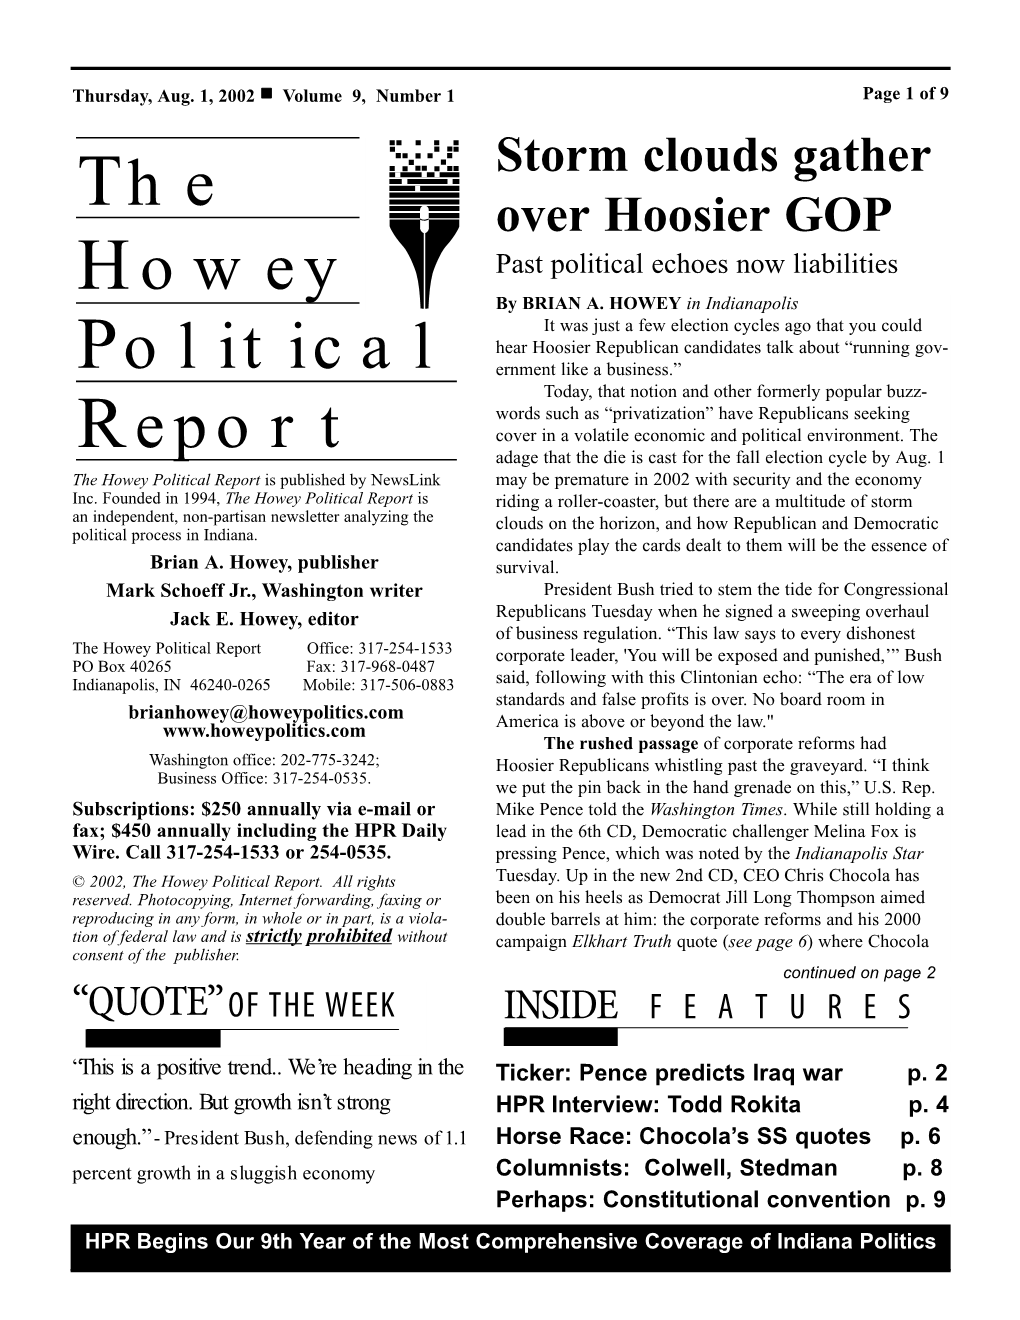 The Howey Political Report Is Published by Newslink May Be Premature in 2002 with Security and the Economy Inc